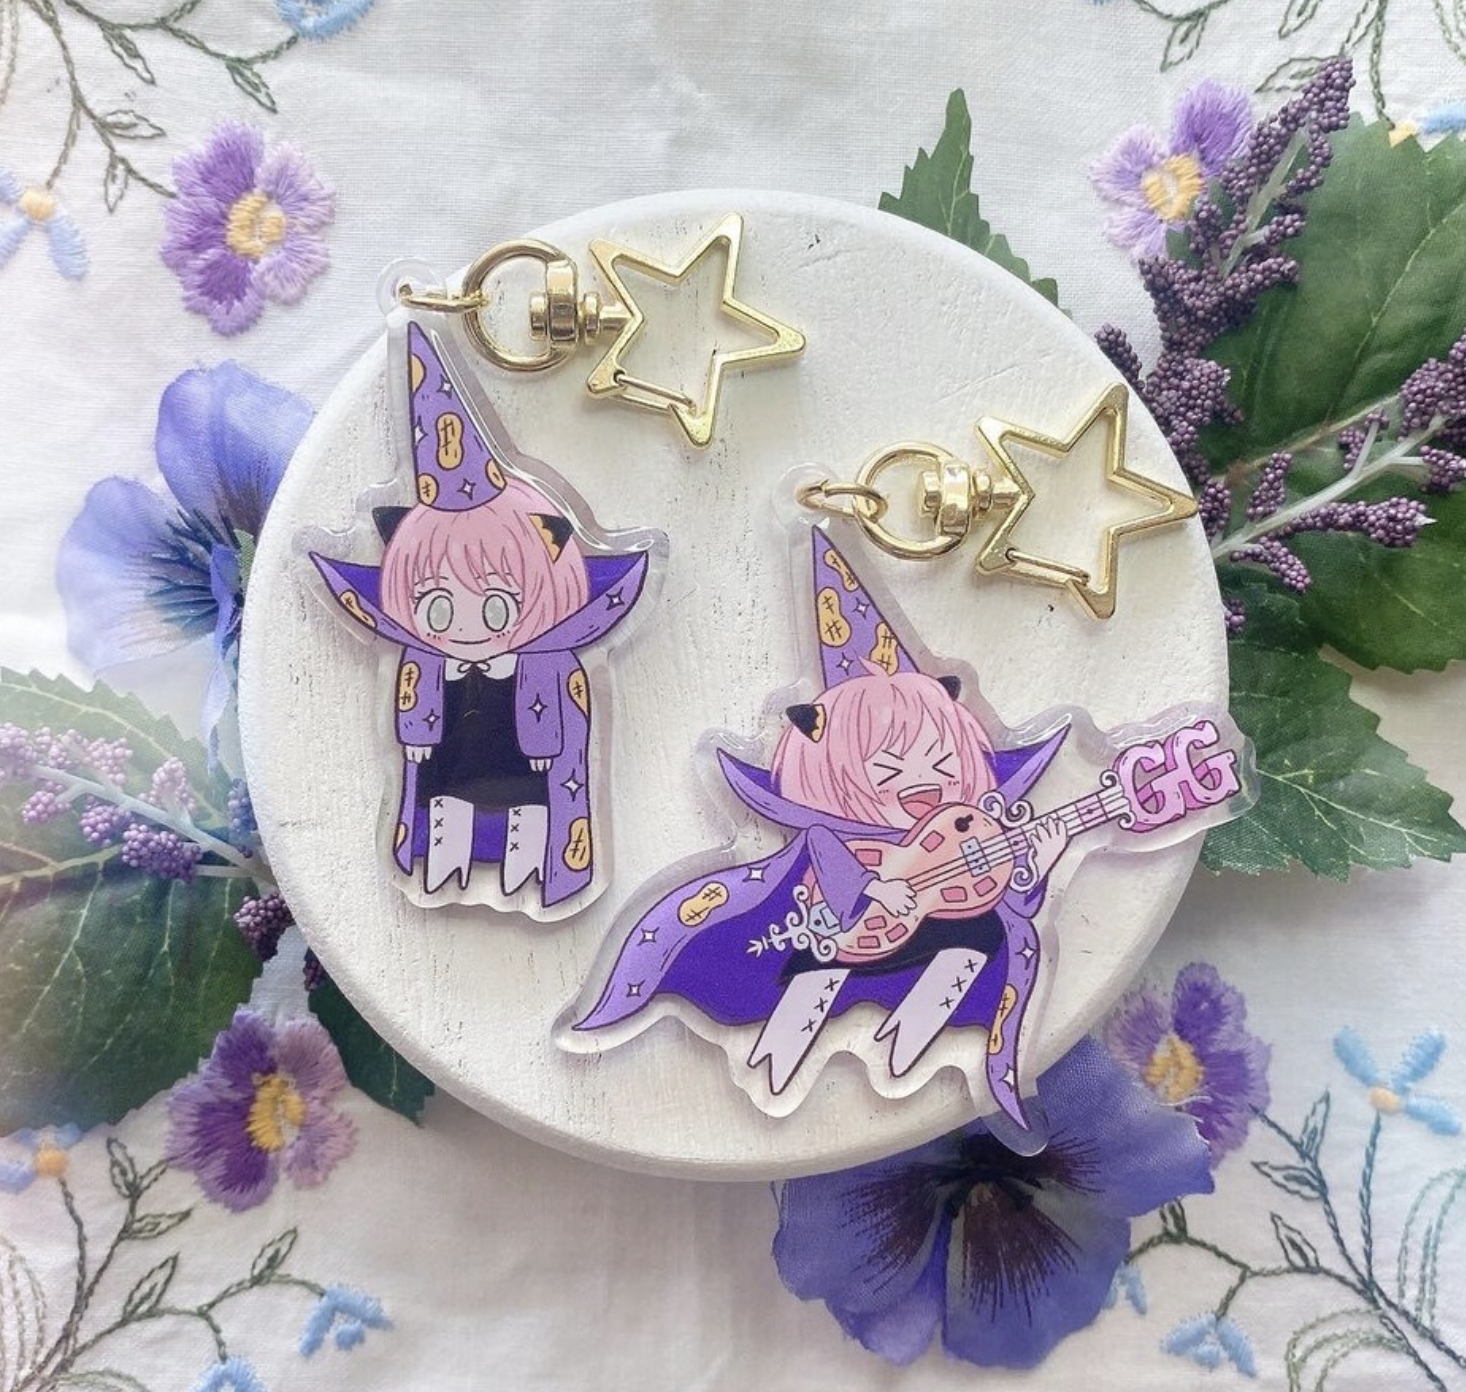 Two anime-style keychains with a star and witch designs, placed on a floral background